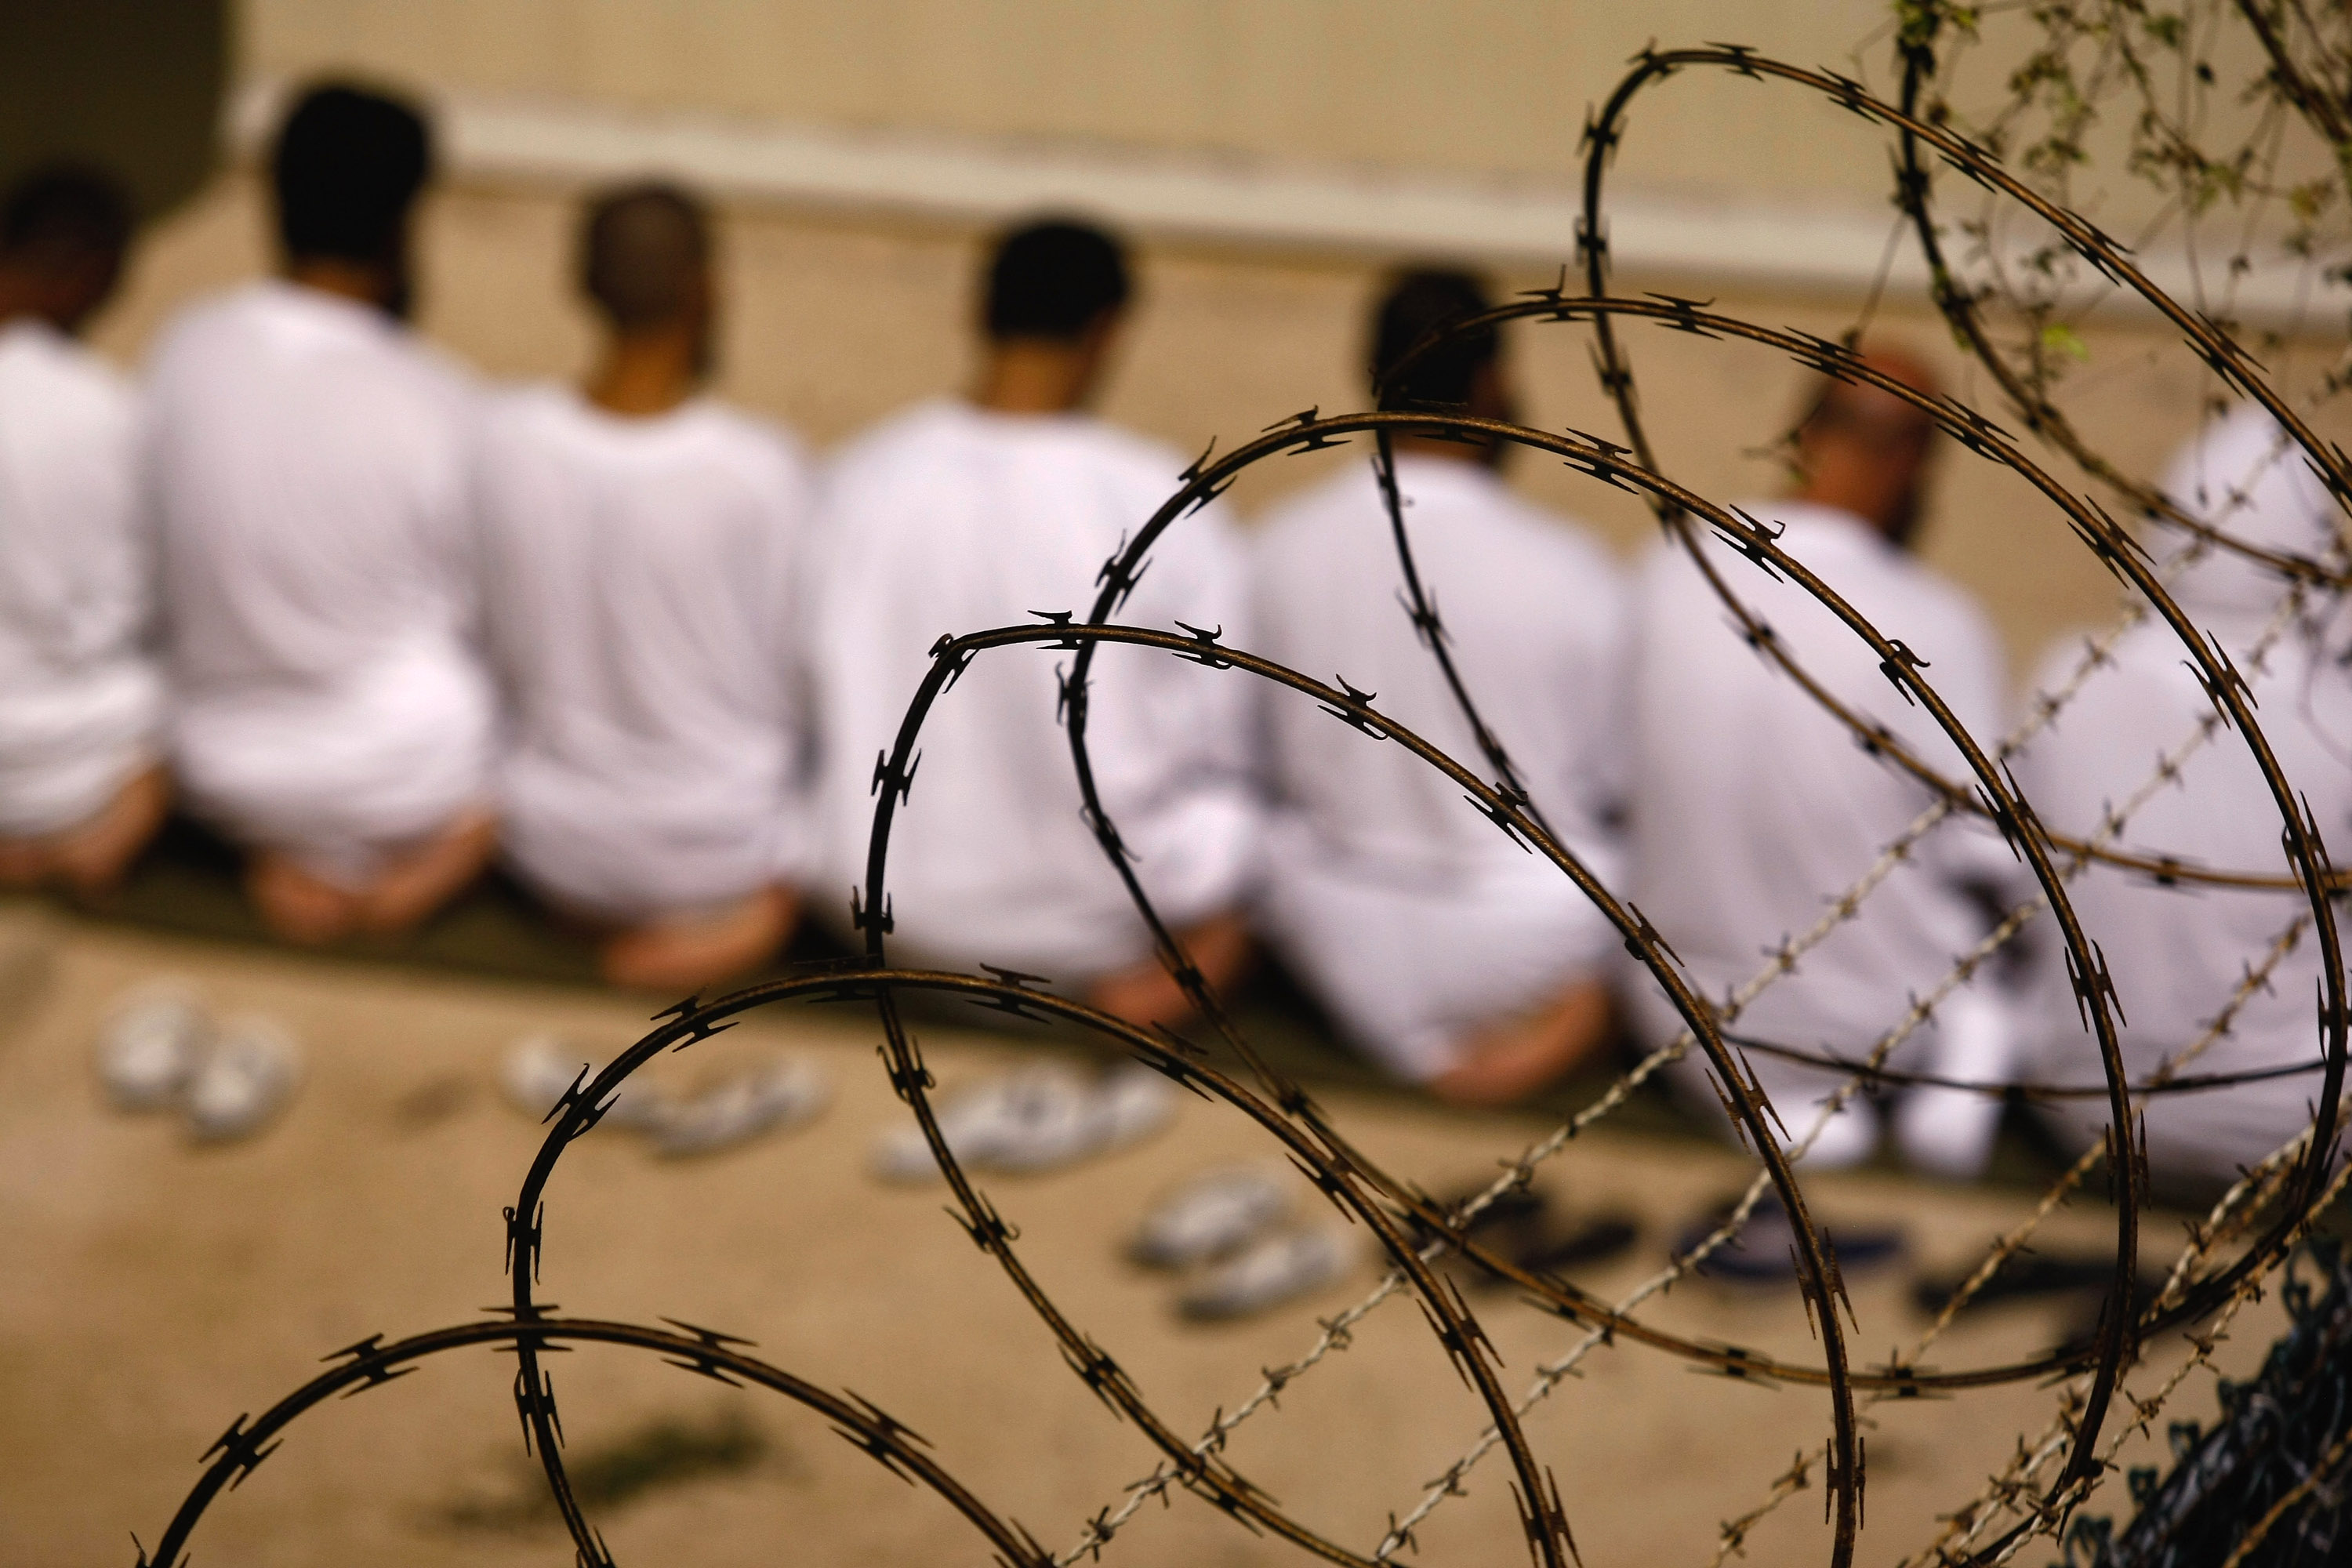 GUANTANAMO BAY, CUBA - OCTOBER 28: (EDITORS NOTE: Image has been reviewed by U.S. Military prior to transmission)  A group of detainees kneels during an early morning Islamic prayer in their camp at the U.S. military prison for &quot;enemy combatants&quot; on October 28, 2009 in Guantanamo Bay, Cuba. Although U.S. President Barack Obama pledged in his first executive order last January to close the infamous prison within a year's time, the government has been struggling to try the accused terrorists and to transfer them out ahead of the deadline. Military officials at the prison point to improved living standards and state of the art medical treatment available to detainees, but the facility's international reputation remains tied to the &quot;enhanced interrogation techniques&quot; such as waterboarding employed under the Bush administration. (Photo by John Moore/Getty Images)